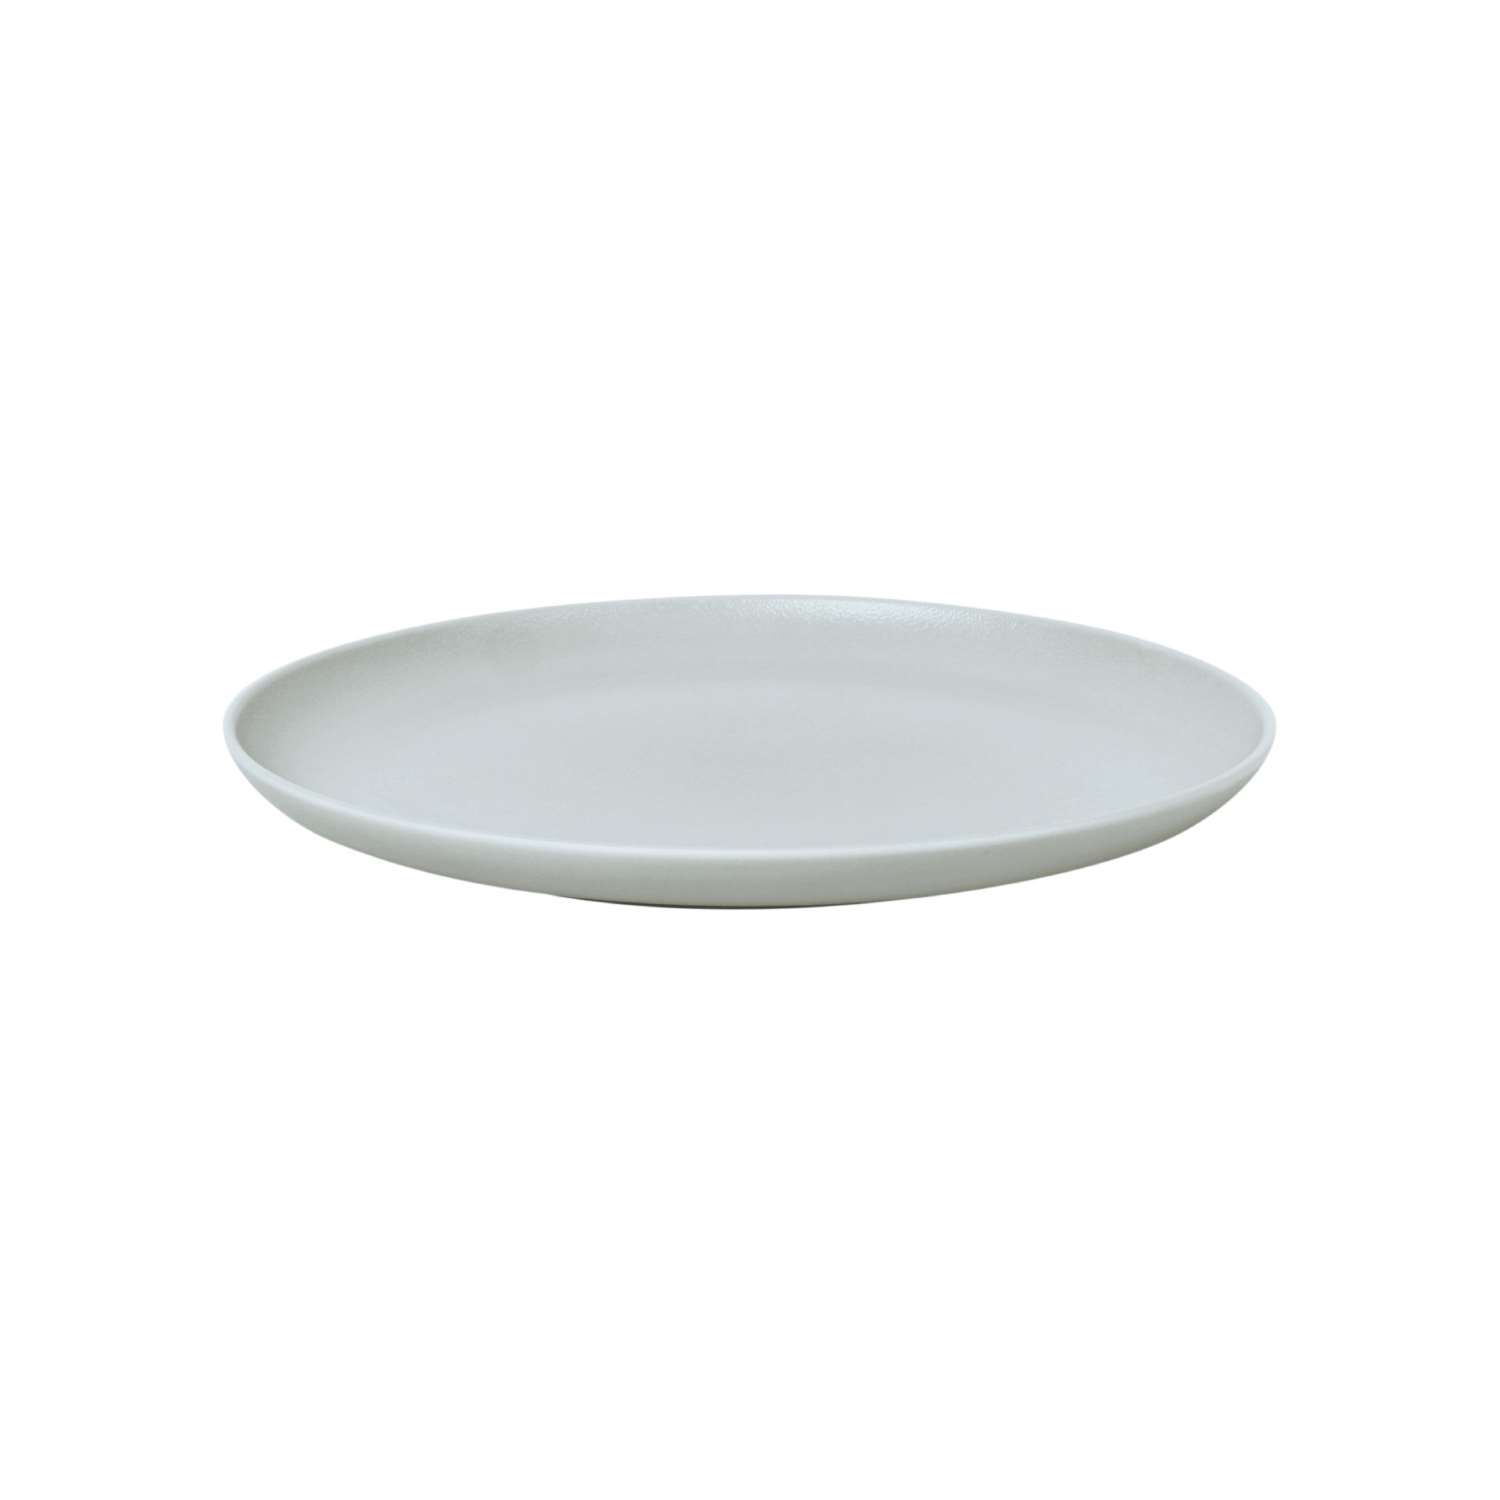 Baralee Light Grey Coupe Plate 30 Cm